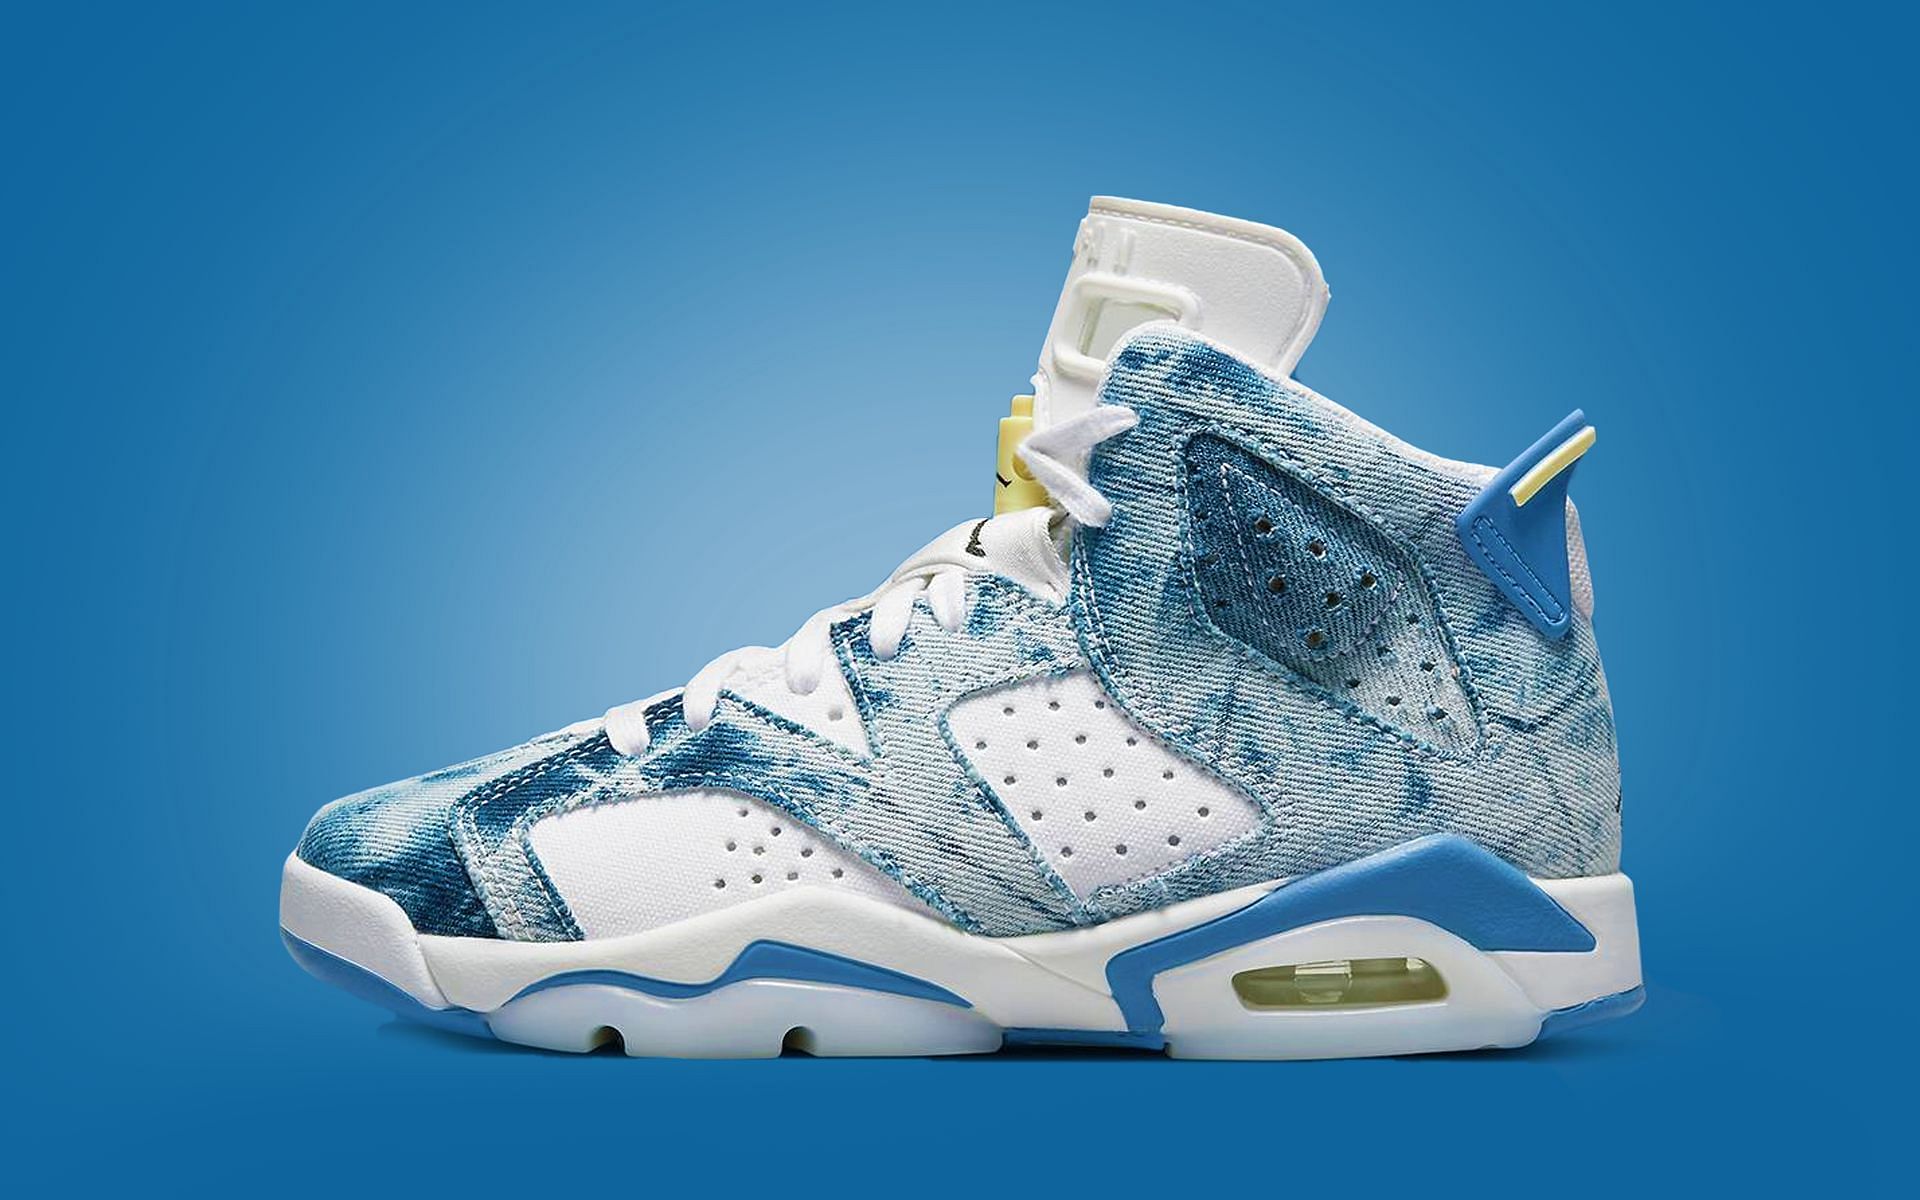 Air Jordan 6 Washed Denim: Release date, where to buy, price and more details explored